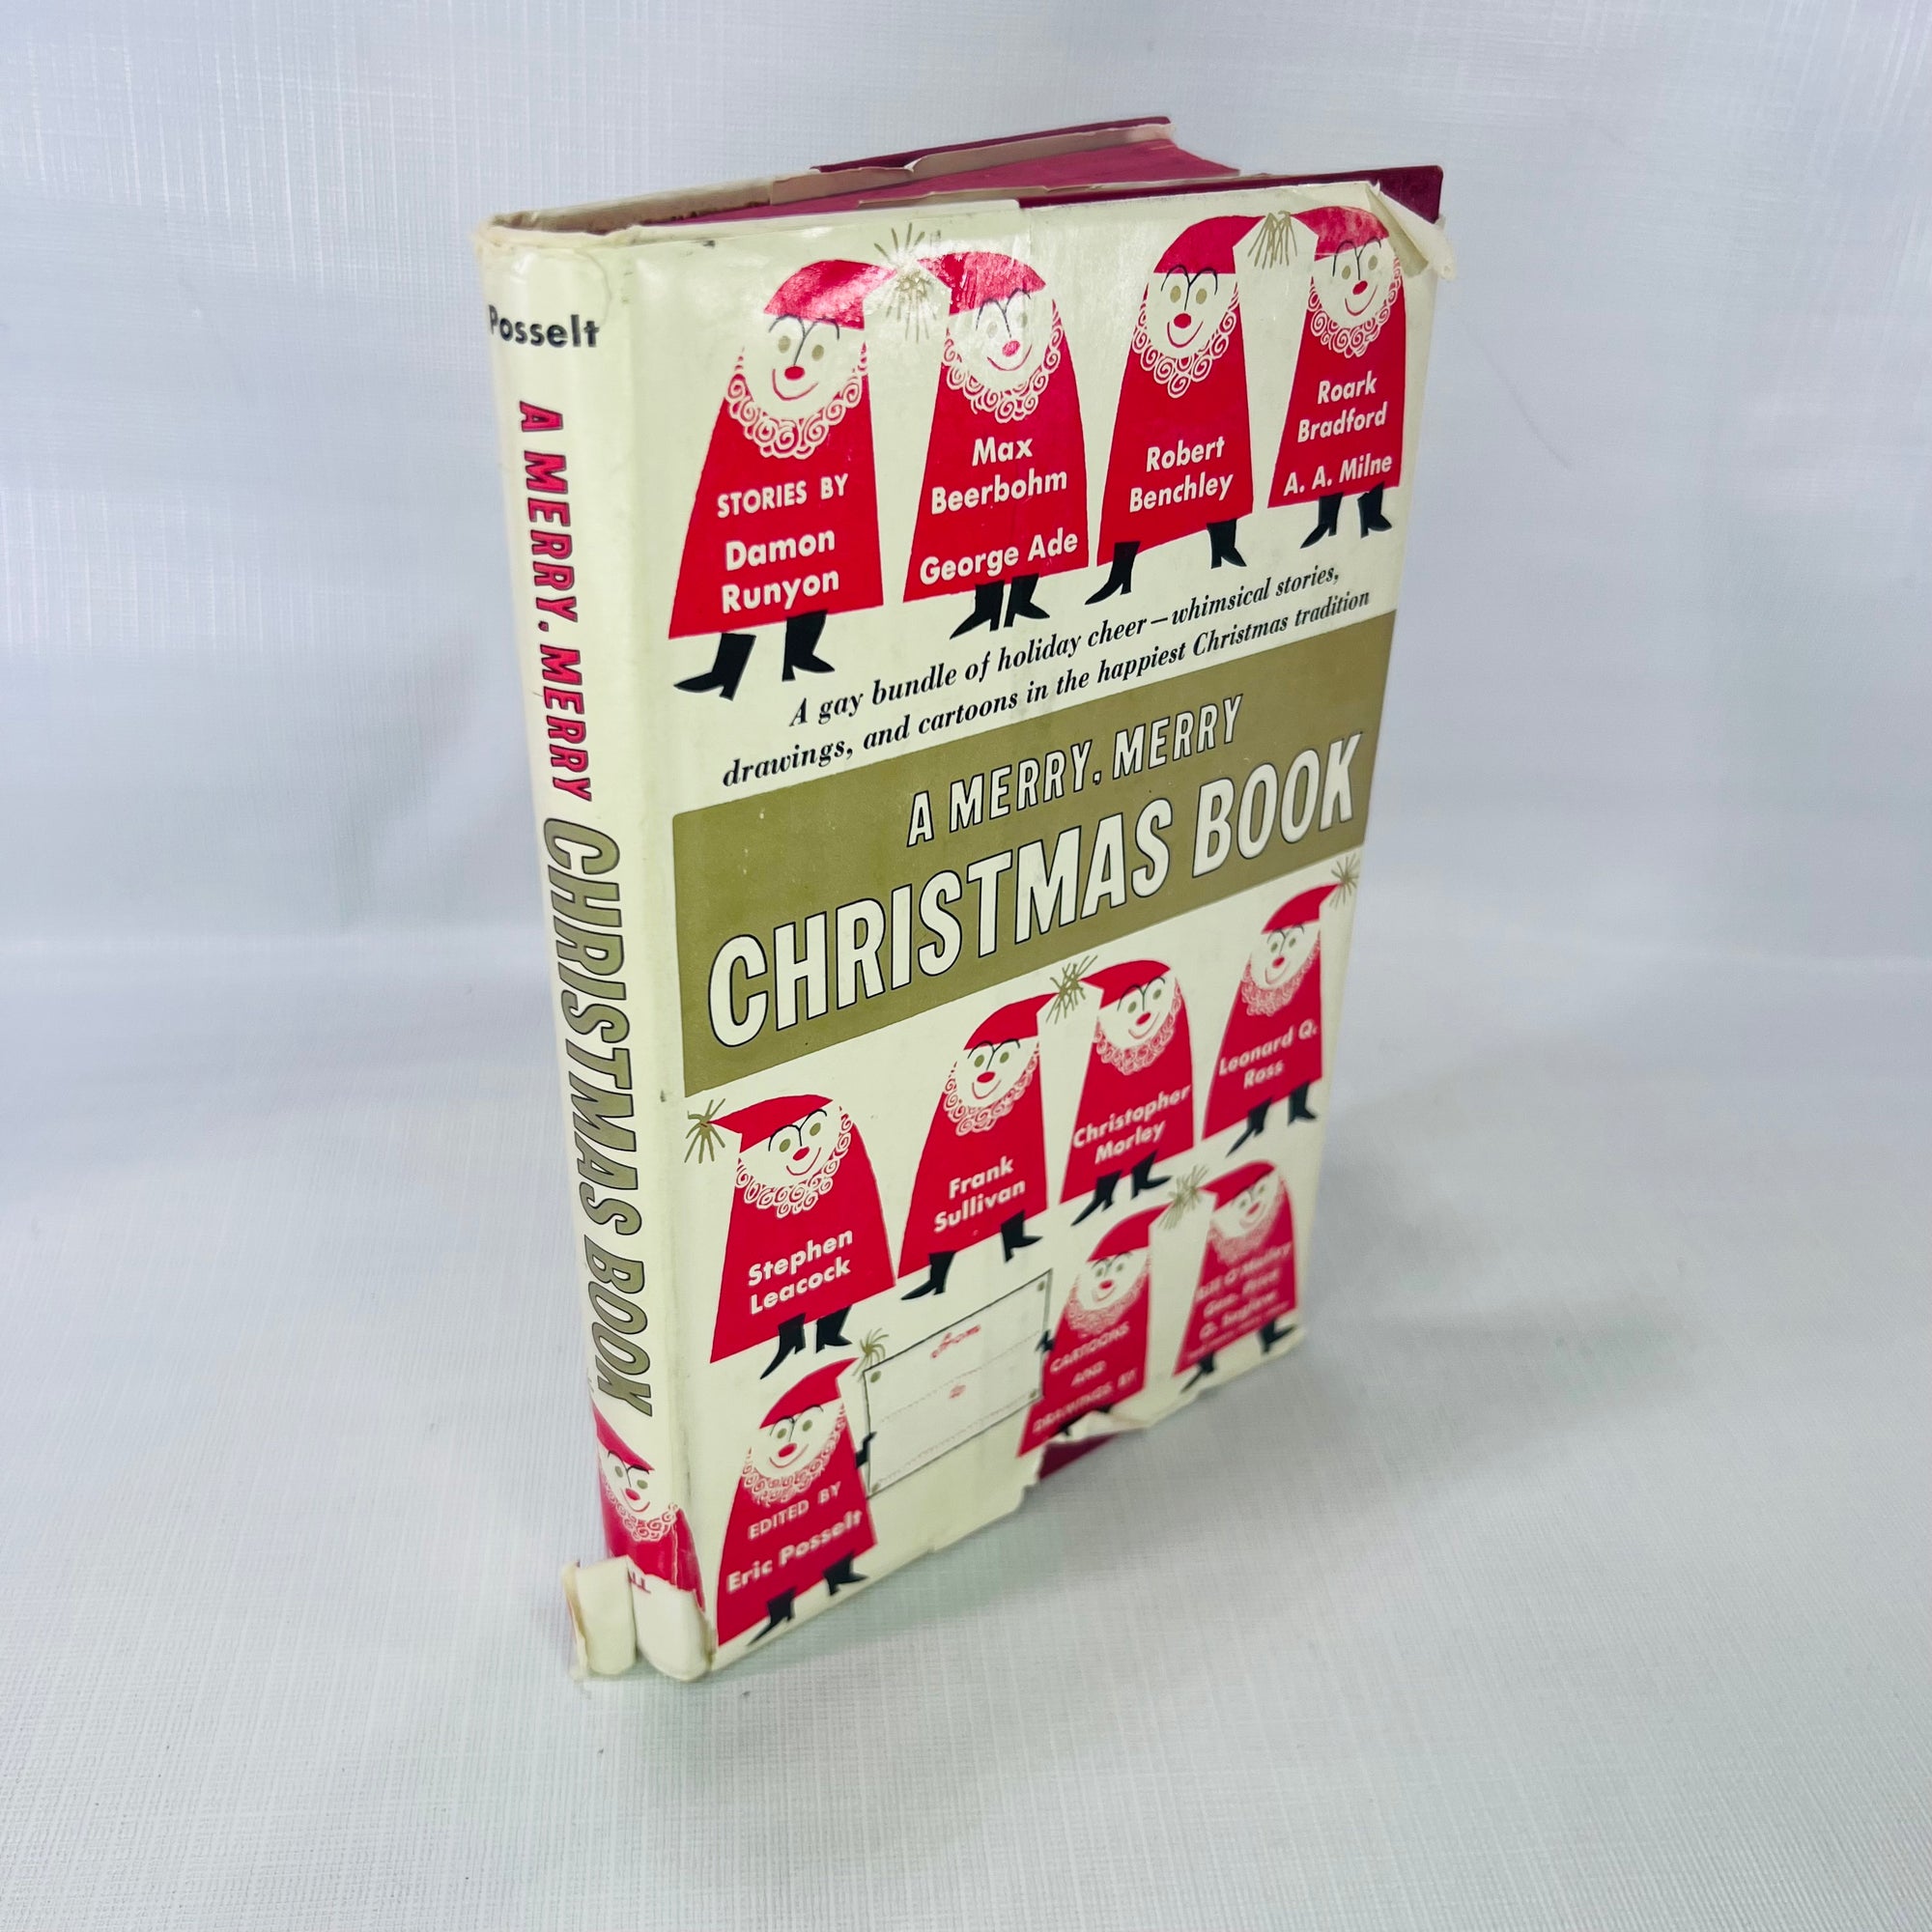 A Merry Merry Christmas Book Edited by Eric Posselt drawings by Dave Lyons 1956 Prentice-Hall Inc.